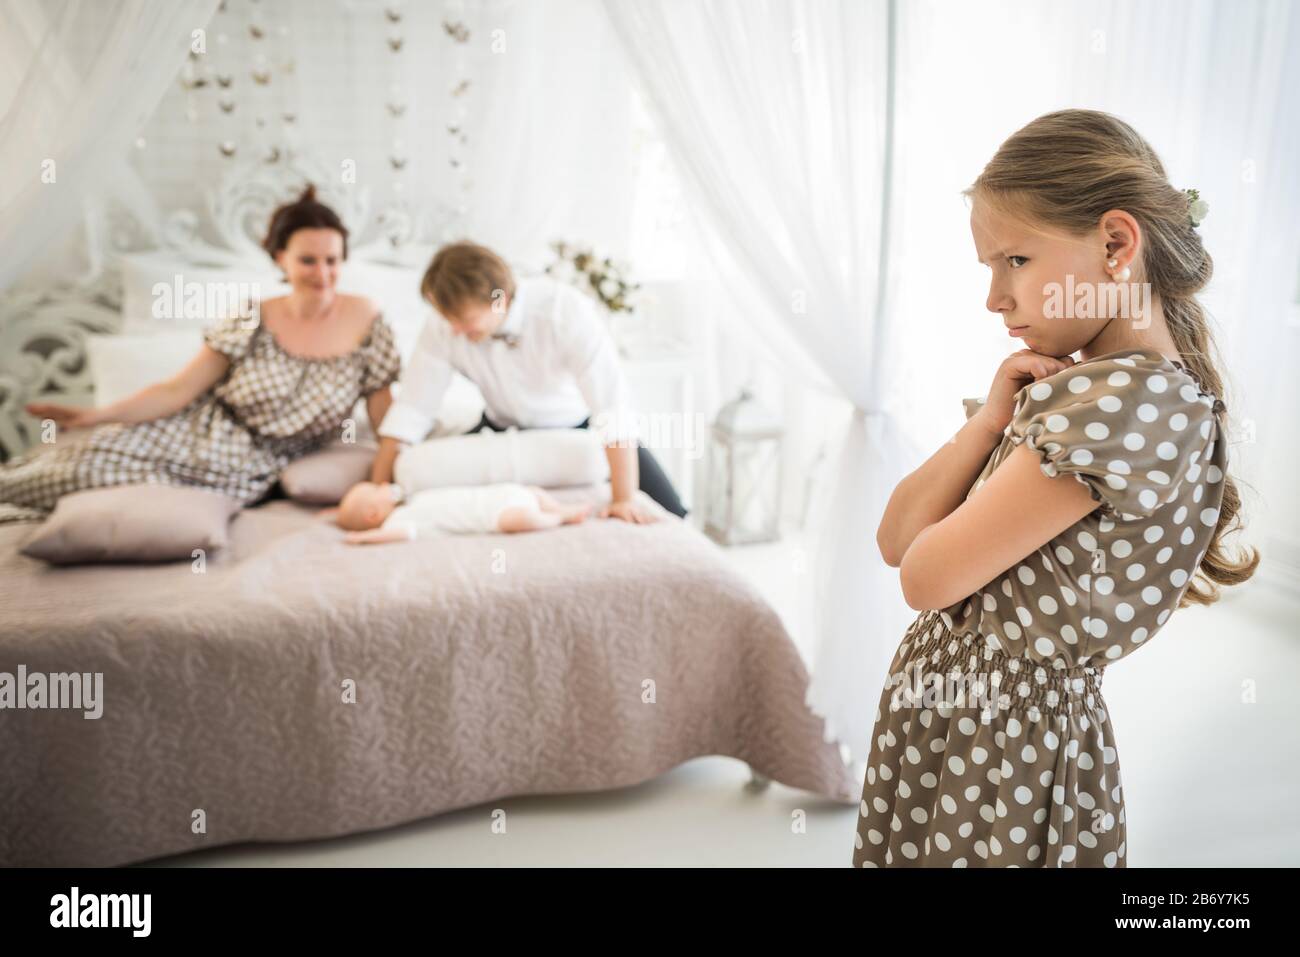 Little cute girl is jealous of her newborn brother lying on the bed next to the blurry happy parents. Concept of selfishness and the big difference in Stock Photo